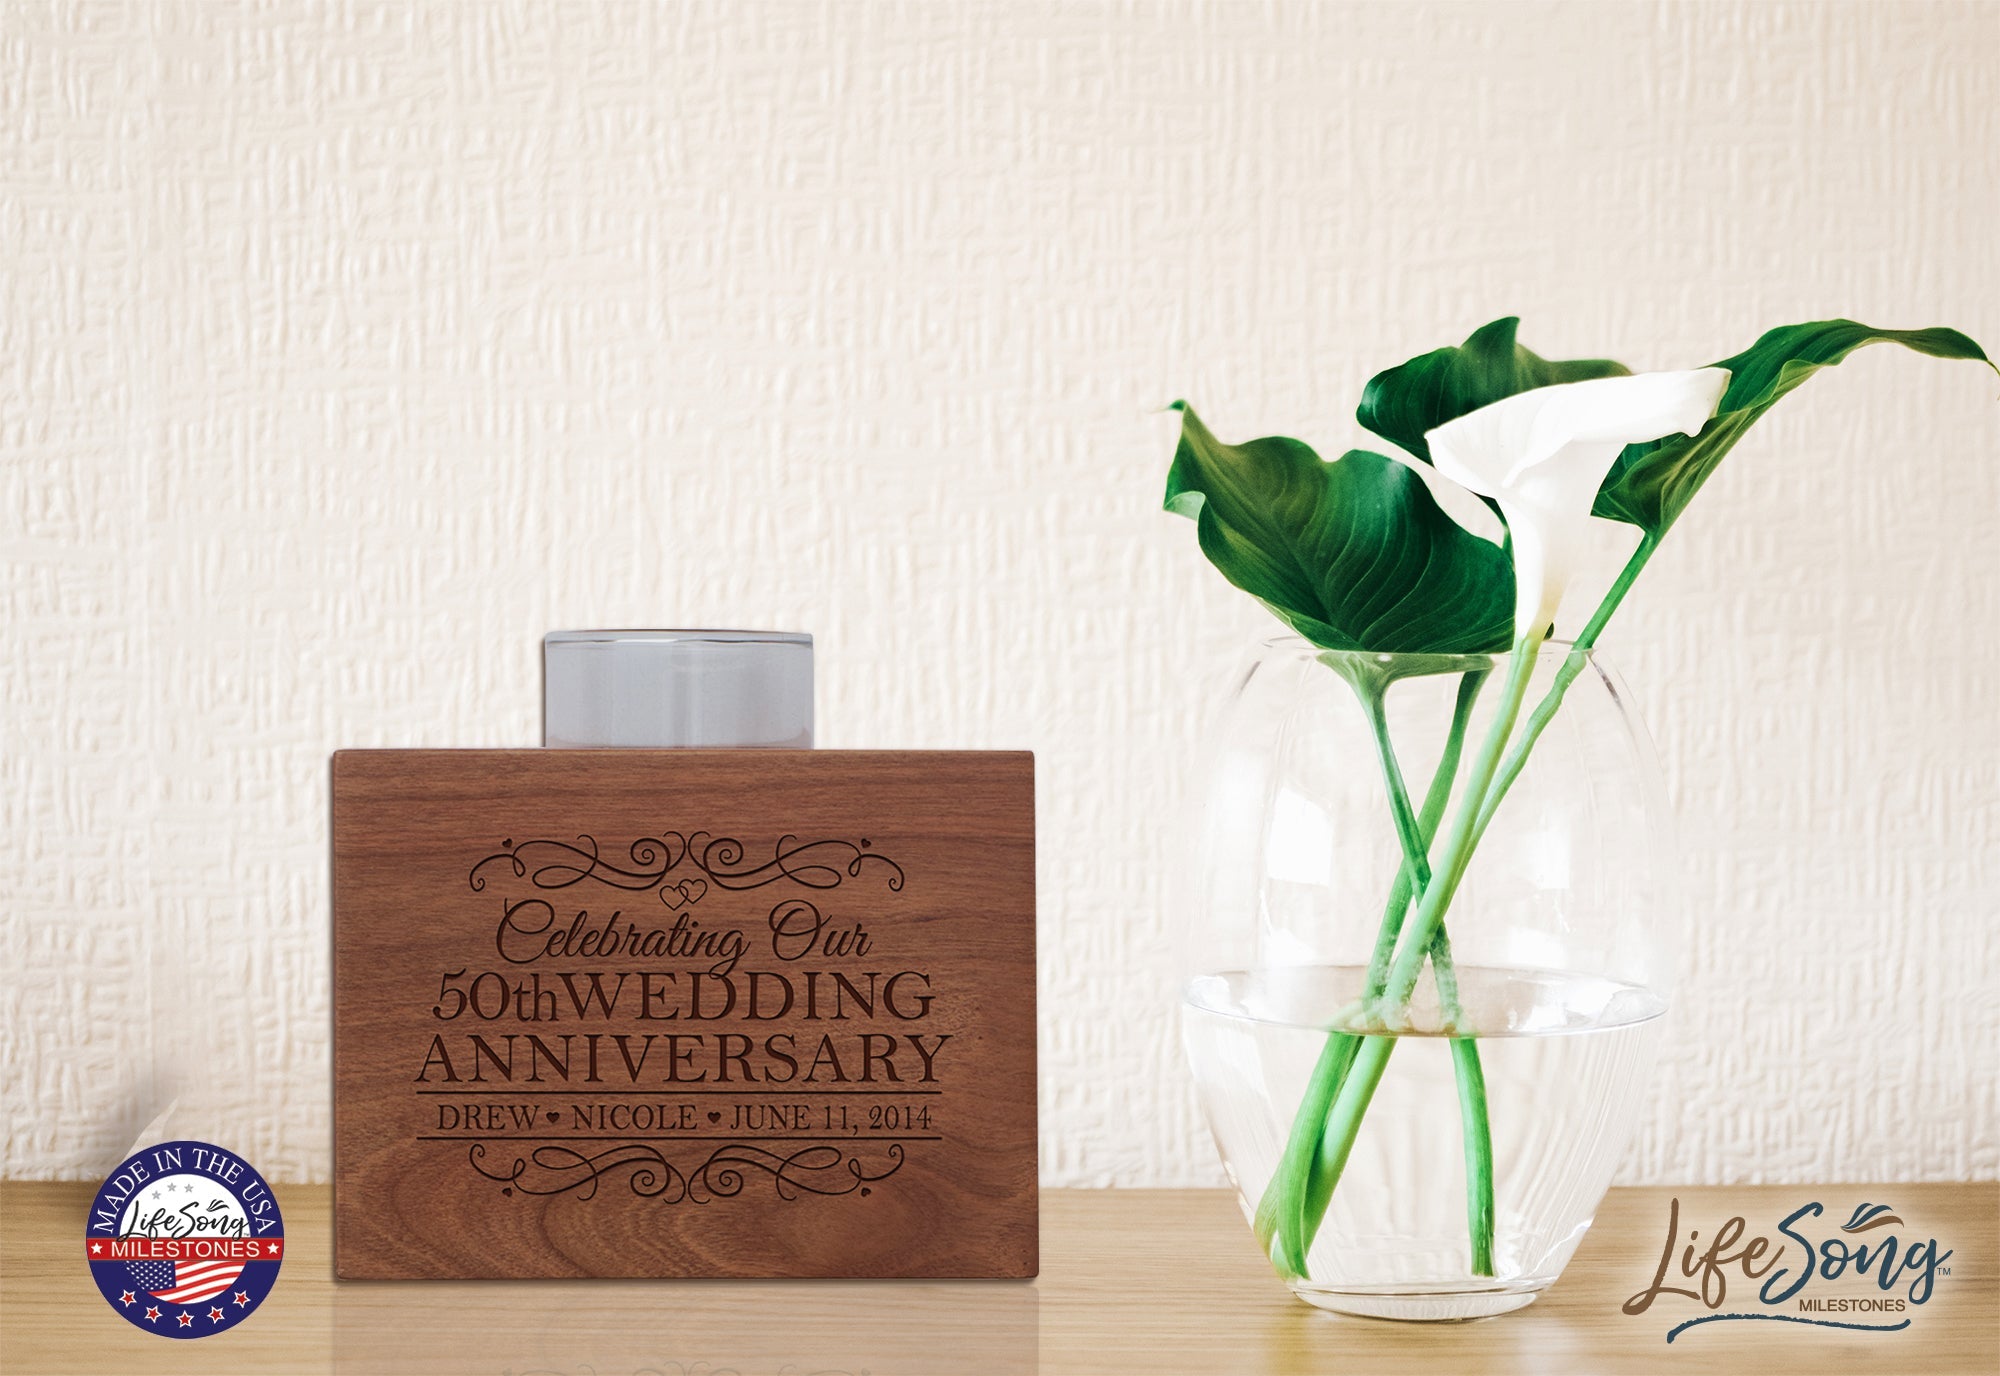 Personalized Cherry Wood Single Votive Candle Holder - 50th Wedding Anniversary - LifeSong Milestones